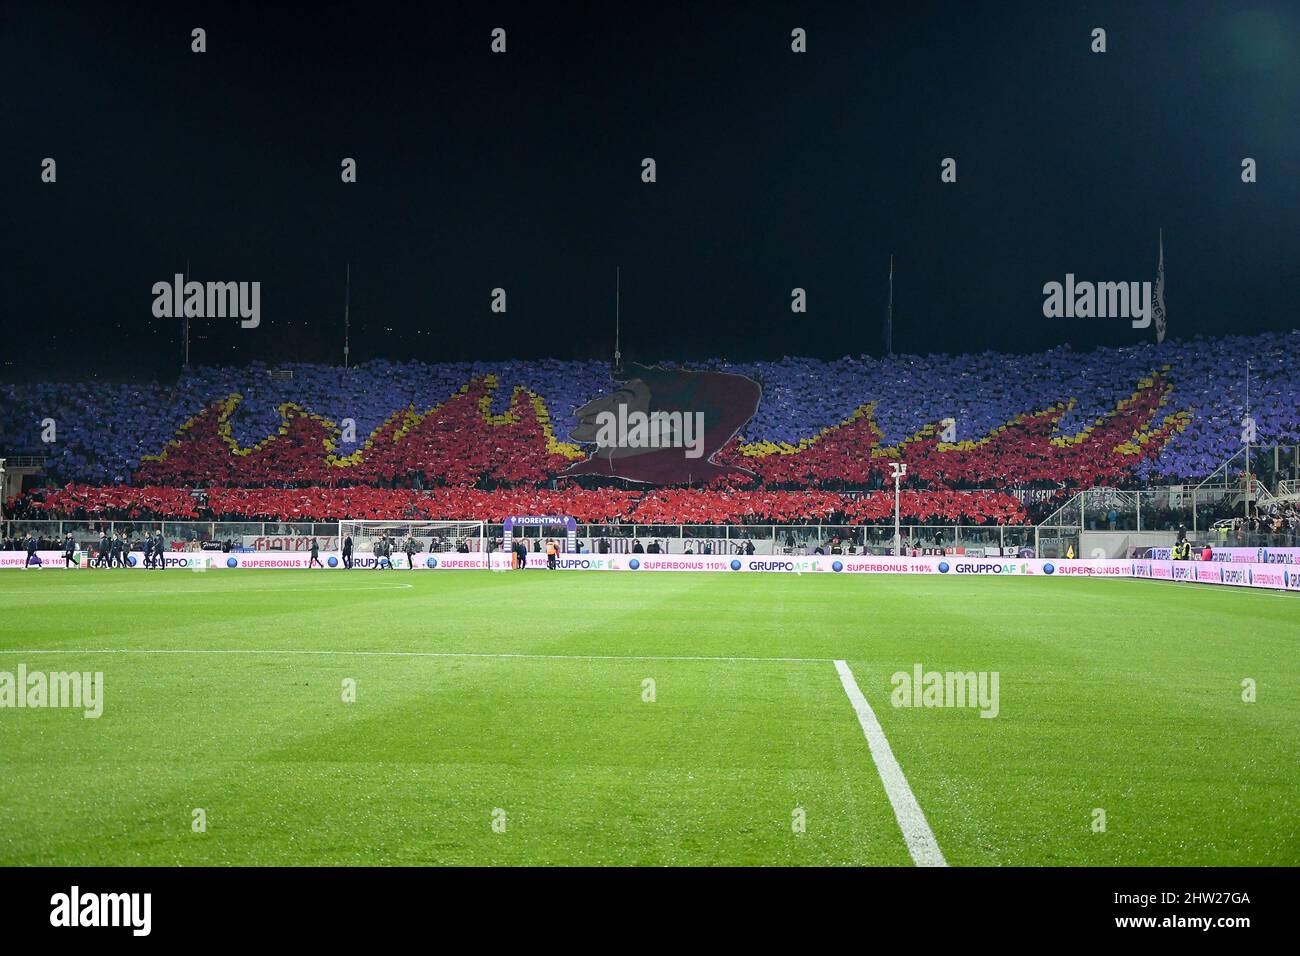 Fiorentina V Juventus High Resolution Stock Photography and Images - Alamy